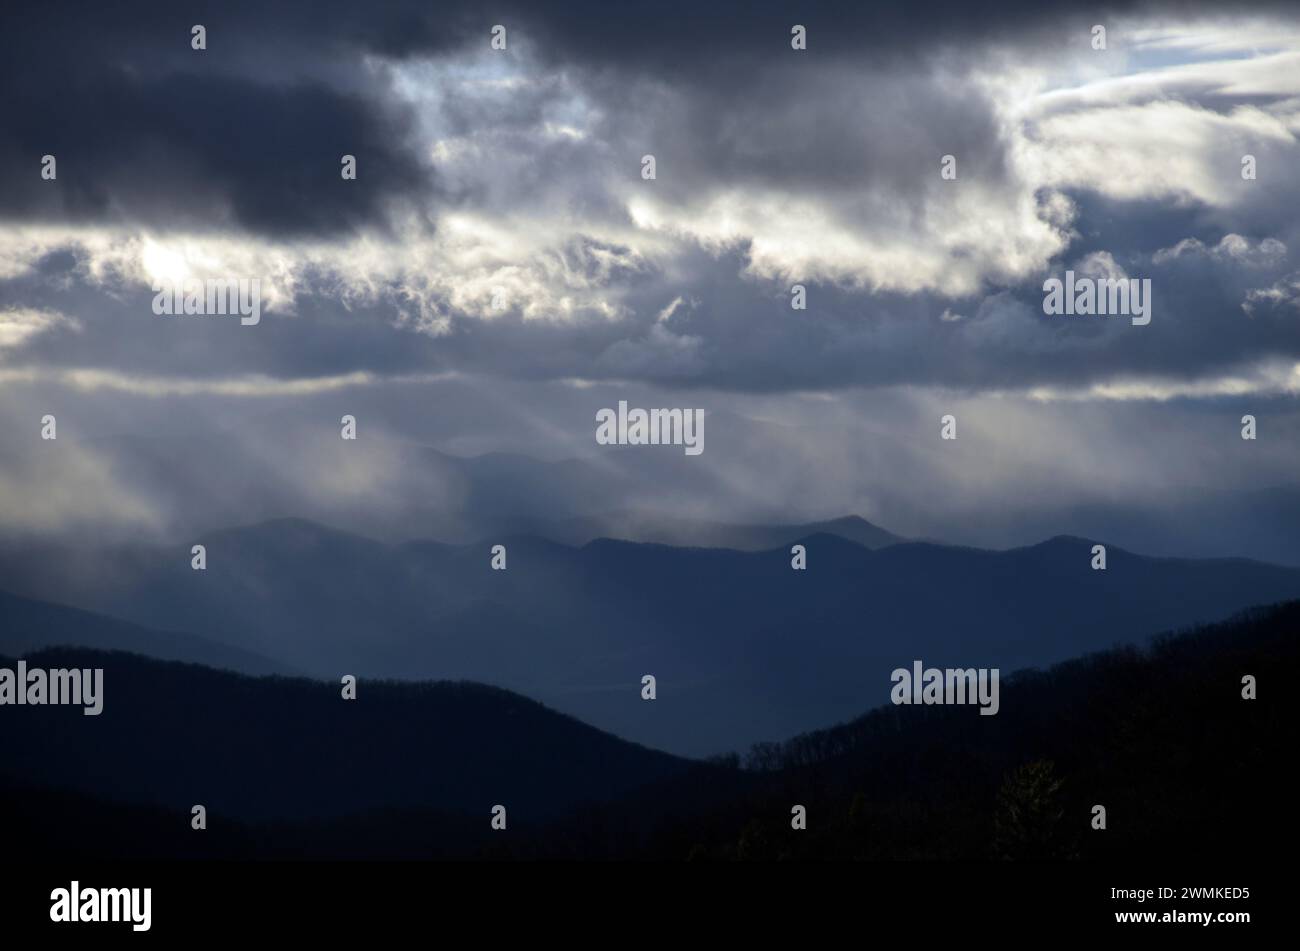 Storm clouds with sunlight over mountain range; Fairview, North Carolina, United States of America Stock Photo